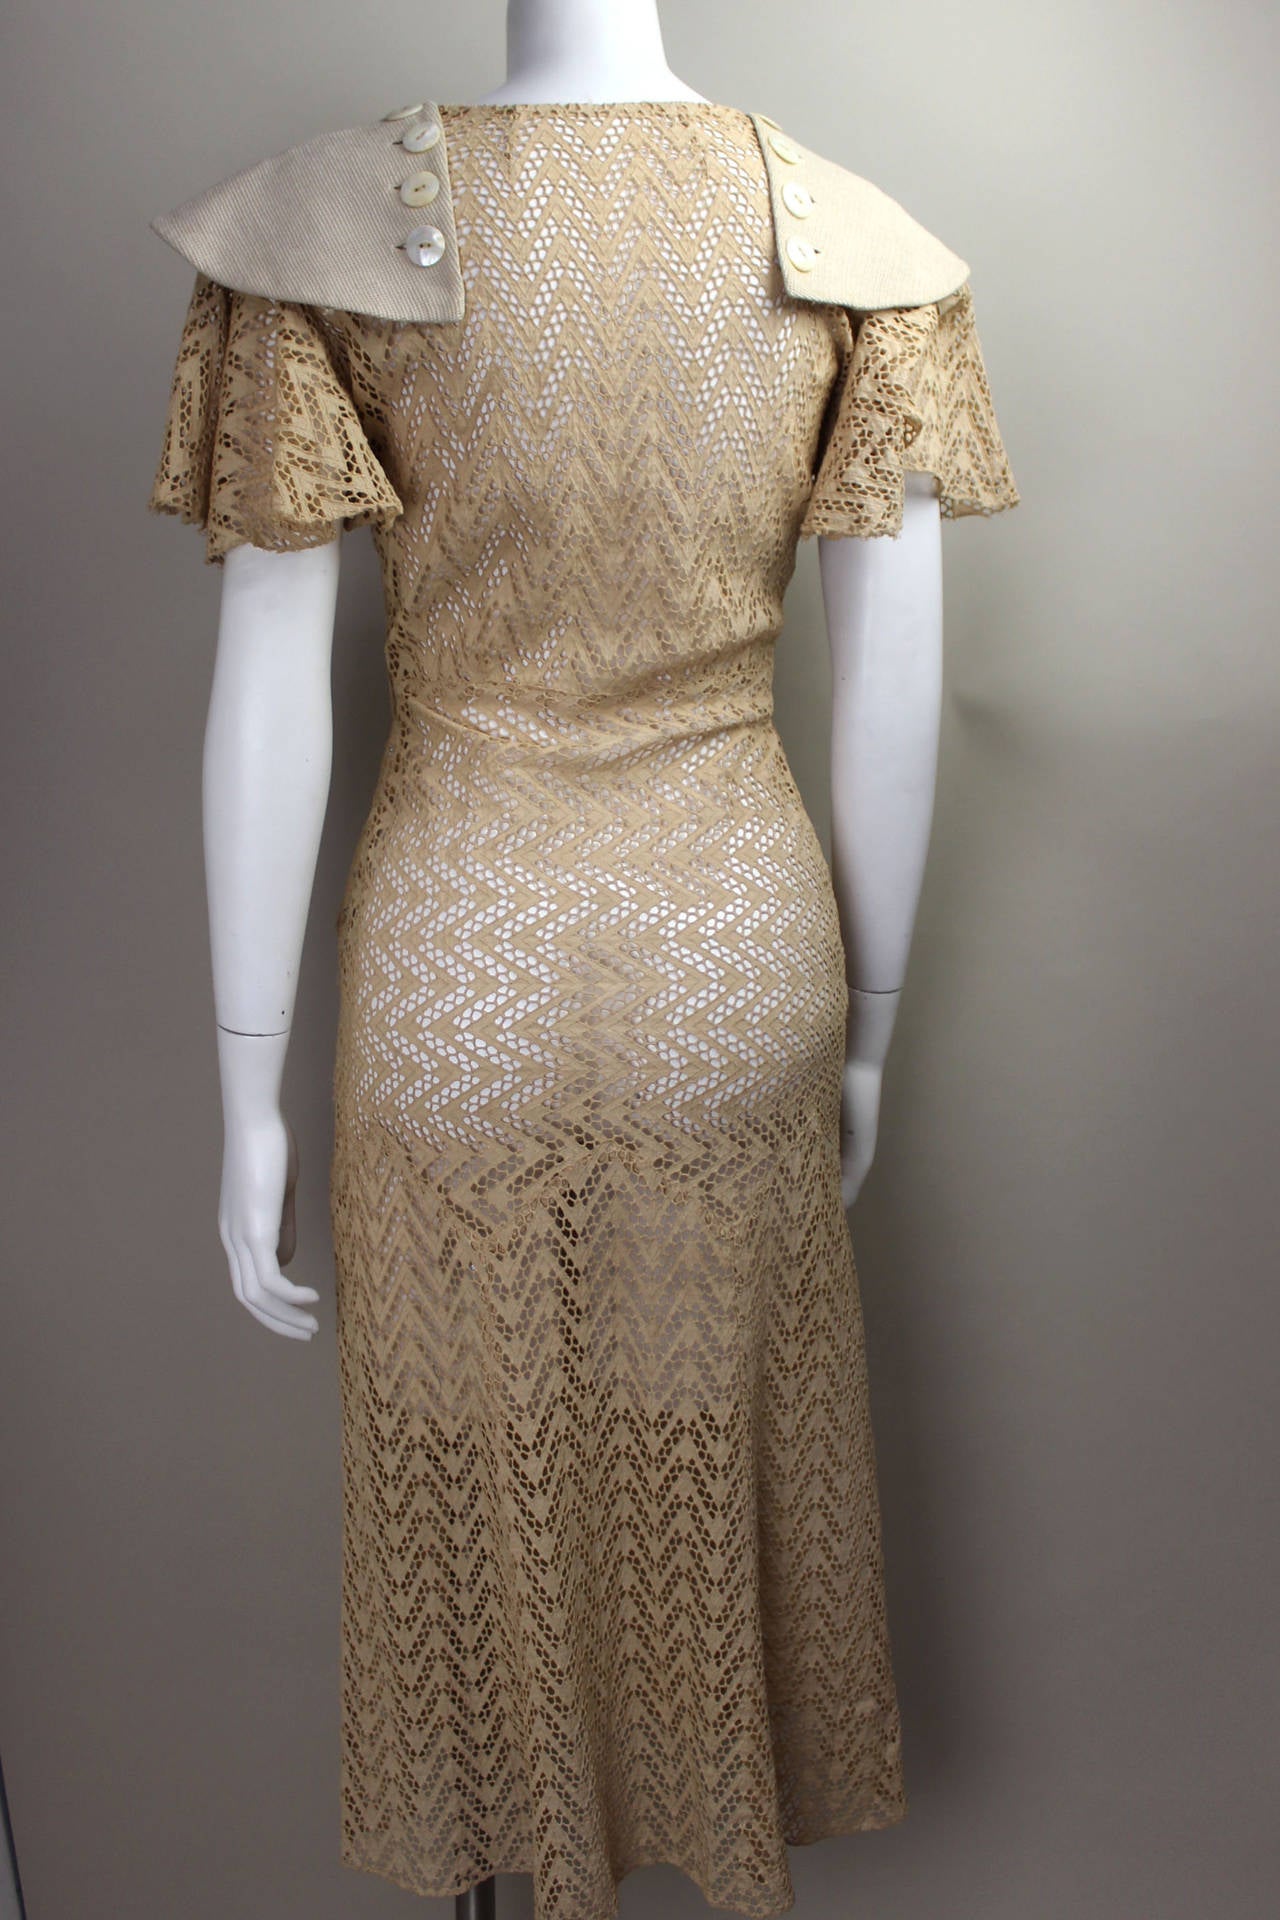 This dress is a rare find from the 1920's with stunning details. A butterfly sleeve is capped with a button on linen panel. The skirt has a slightly defined waist as well as a dropped hip panel with a slight flare, all in a lovely ecru.